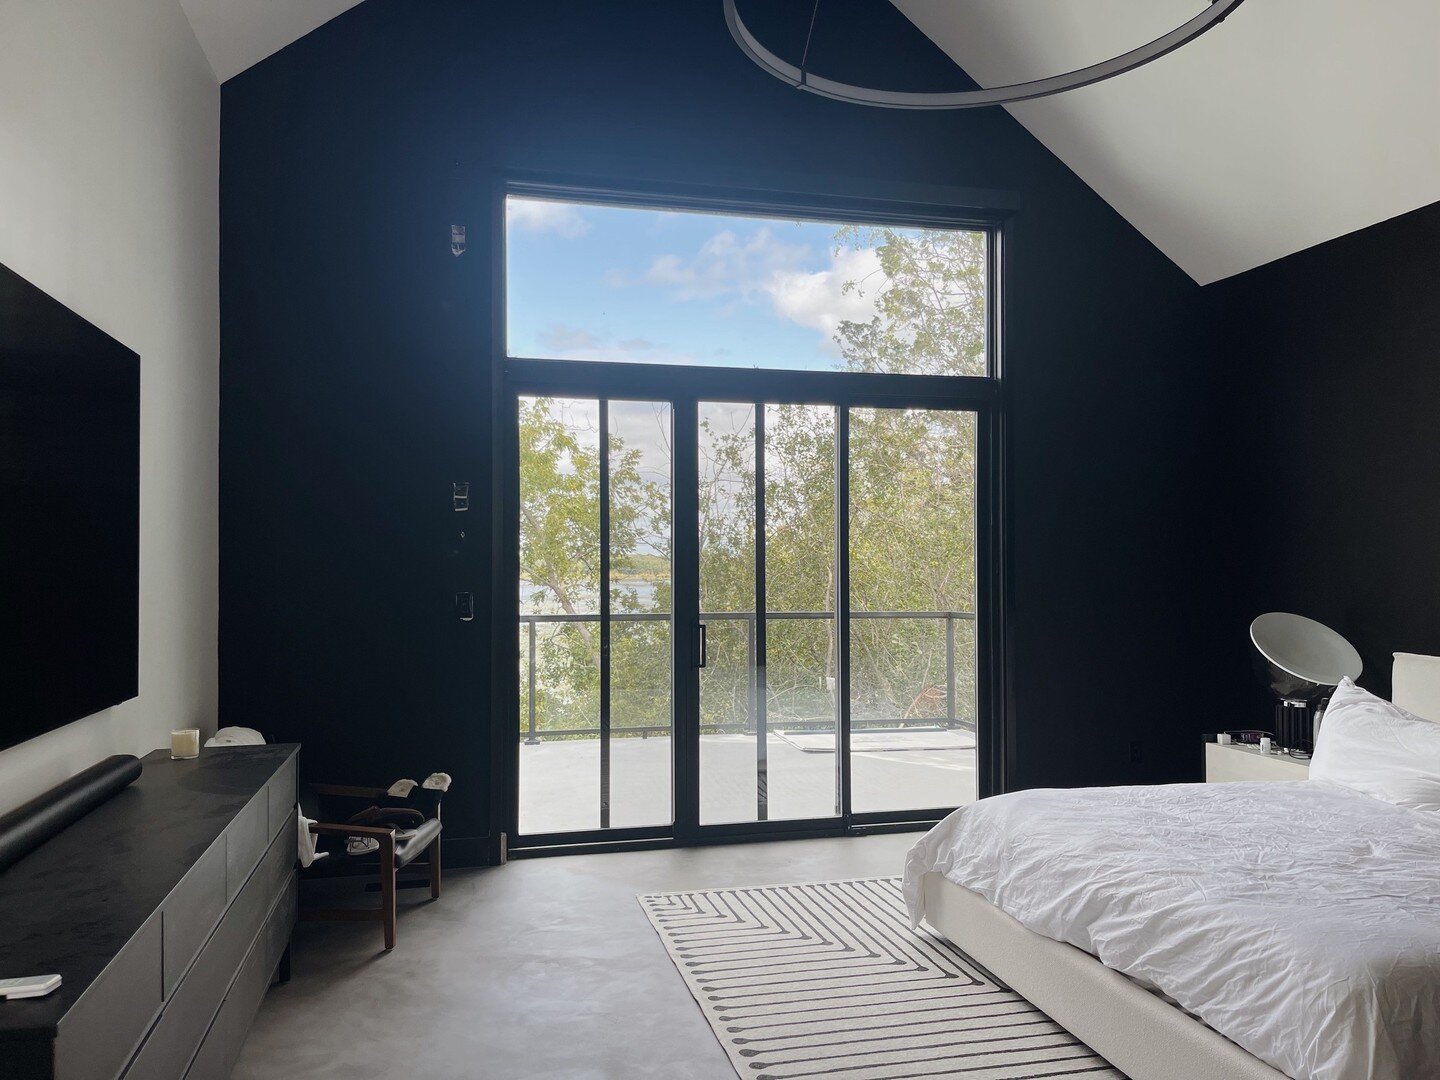 A room with a view. Beautiful doors flank the water facing side of this beautiful new custom home, even the master suite boasts a view of the swans in the morning.⁠
⁠
New Custom Home by @marquiseconstruction⁠
Architectural Design by Maclan Designs